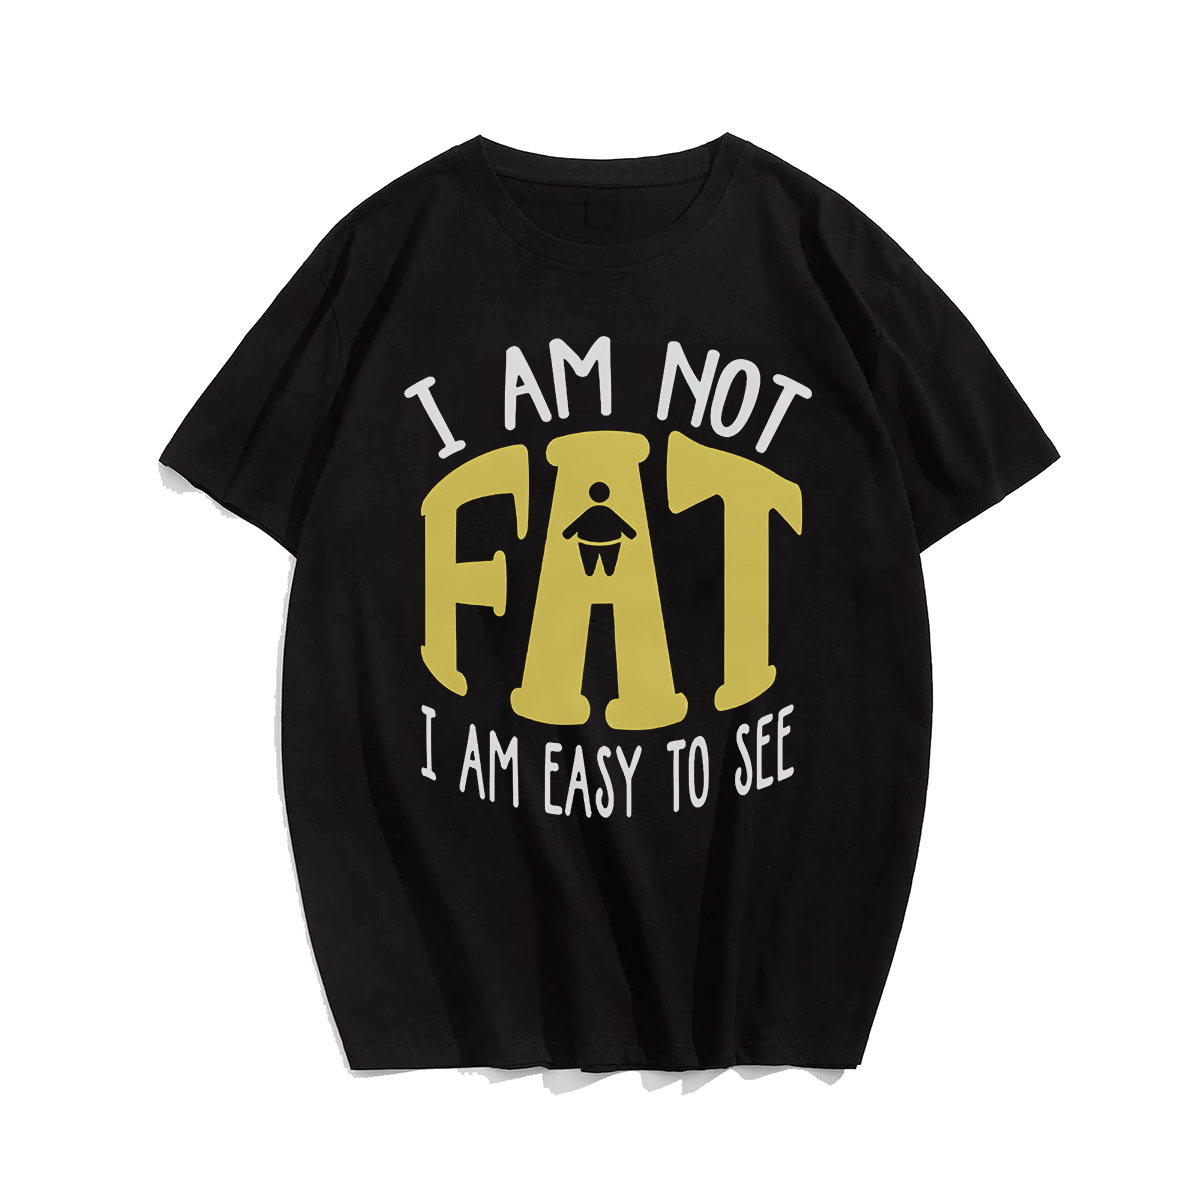 I AM NOT FAT T-shirt for Men, Oversize Plus Size Big & Tall Man Clothing